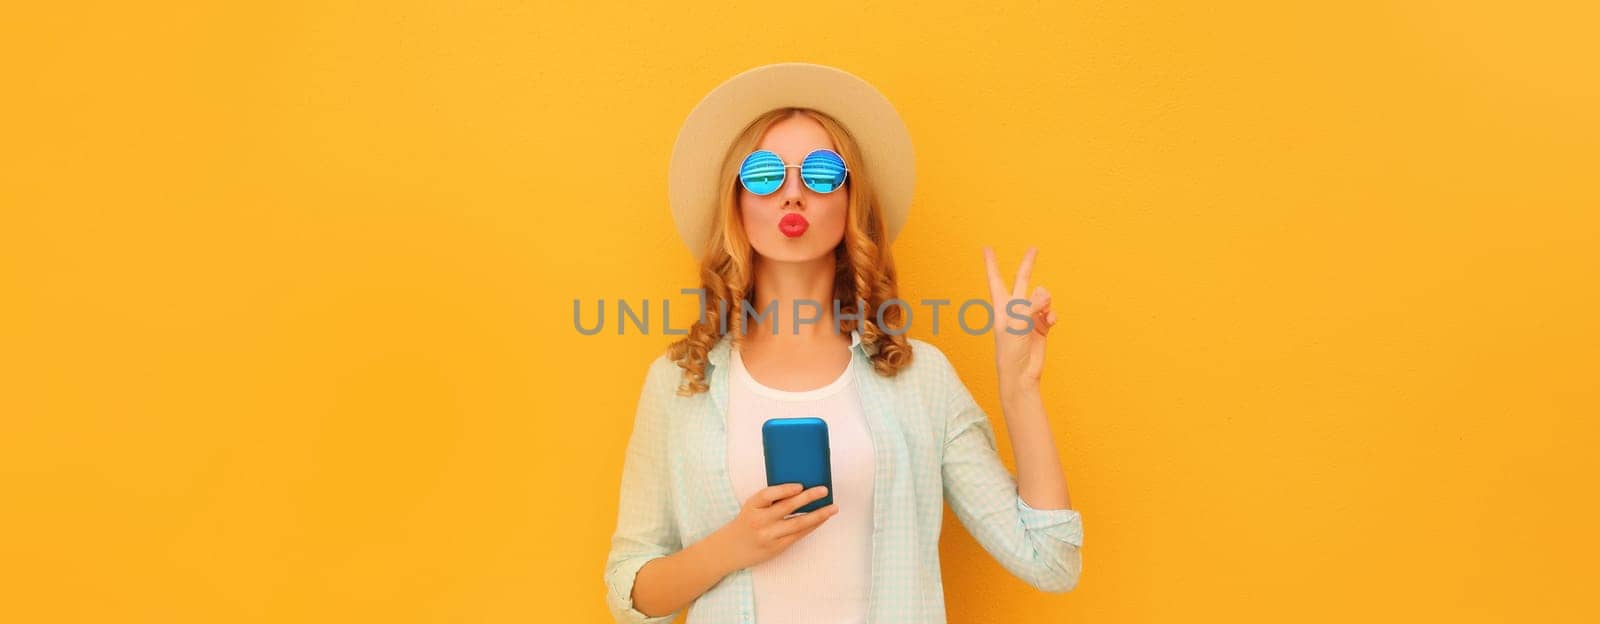 Stylish woman posing blowing a kiss with smartphone wearing summer hat posing on yellow background by Rohappy